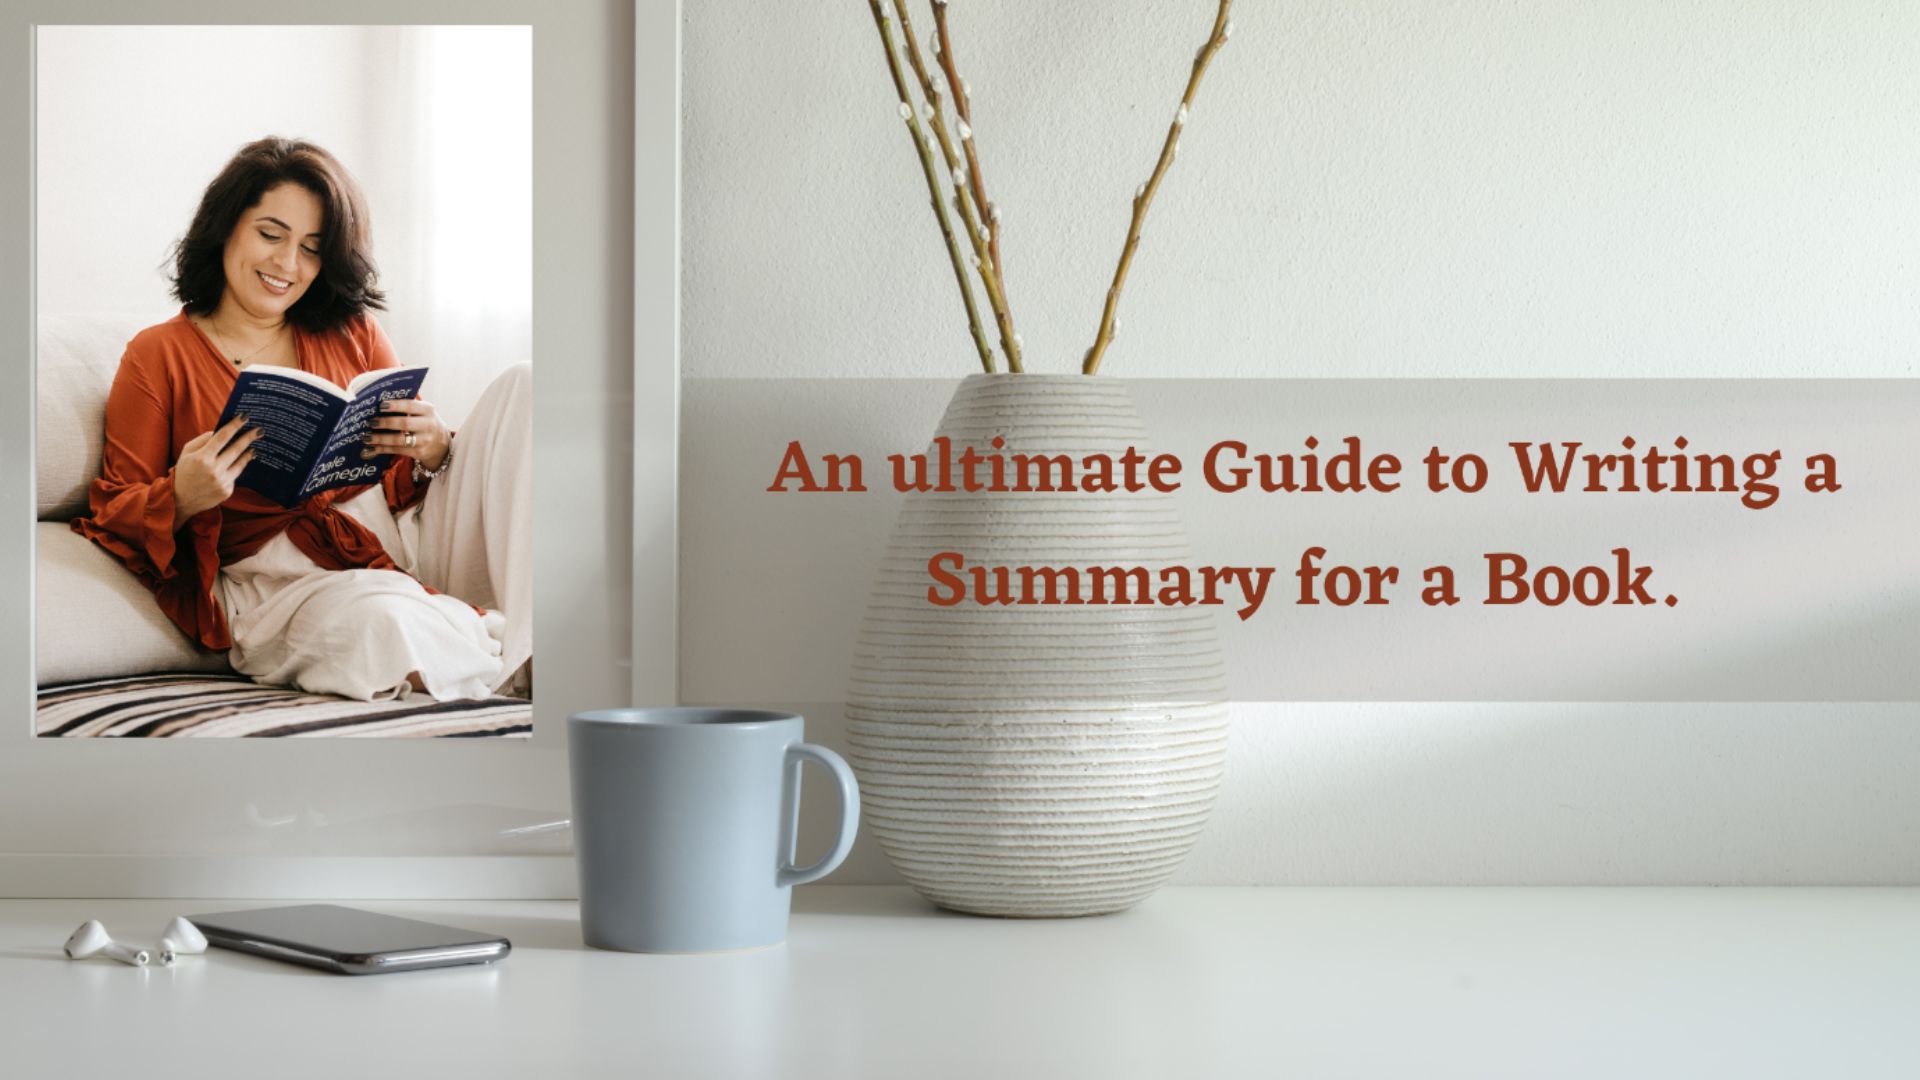 An ultimate Guide to Writing a Summary for a Book